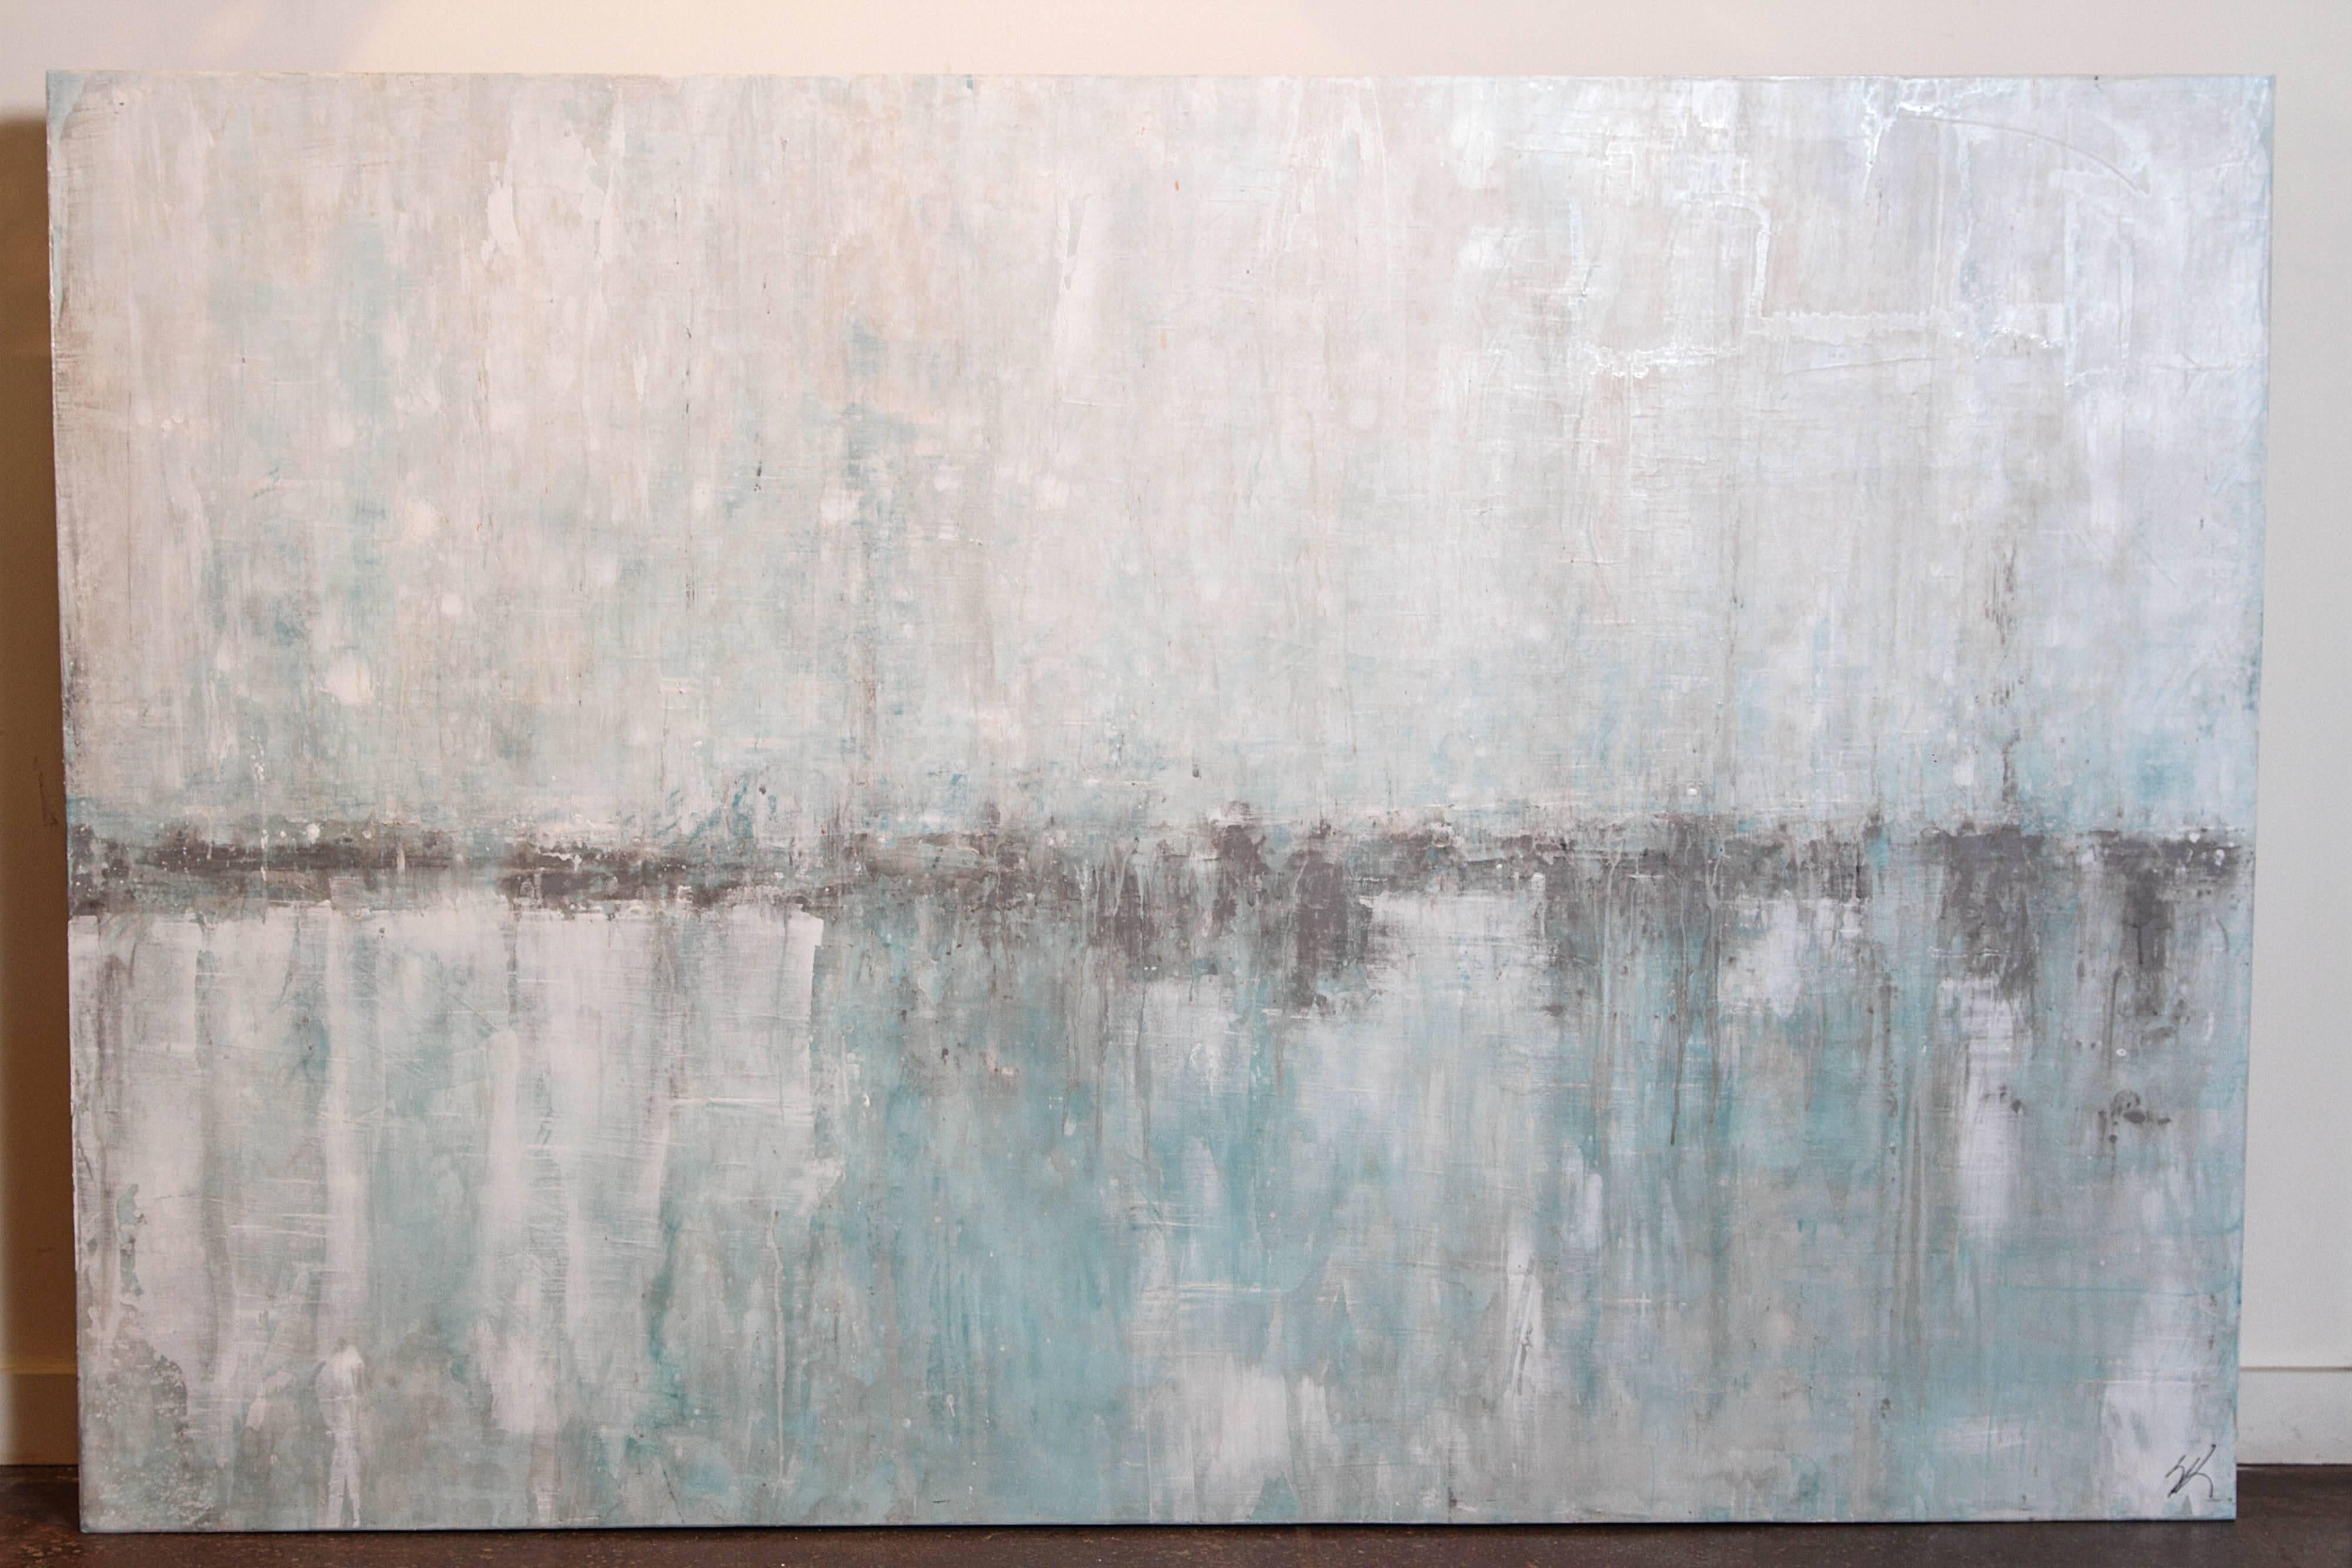 Simplicity (48 x 72). 
Original artwork by Scott Kerr. 
Technique: Venetian plaster on board, horizon colors fill with light blue, beige and white throughout the painting.
 